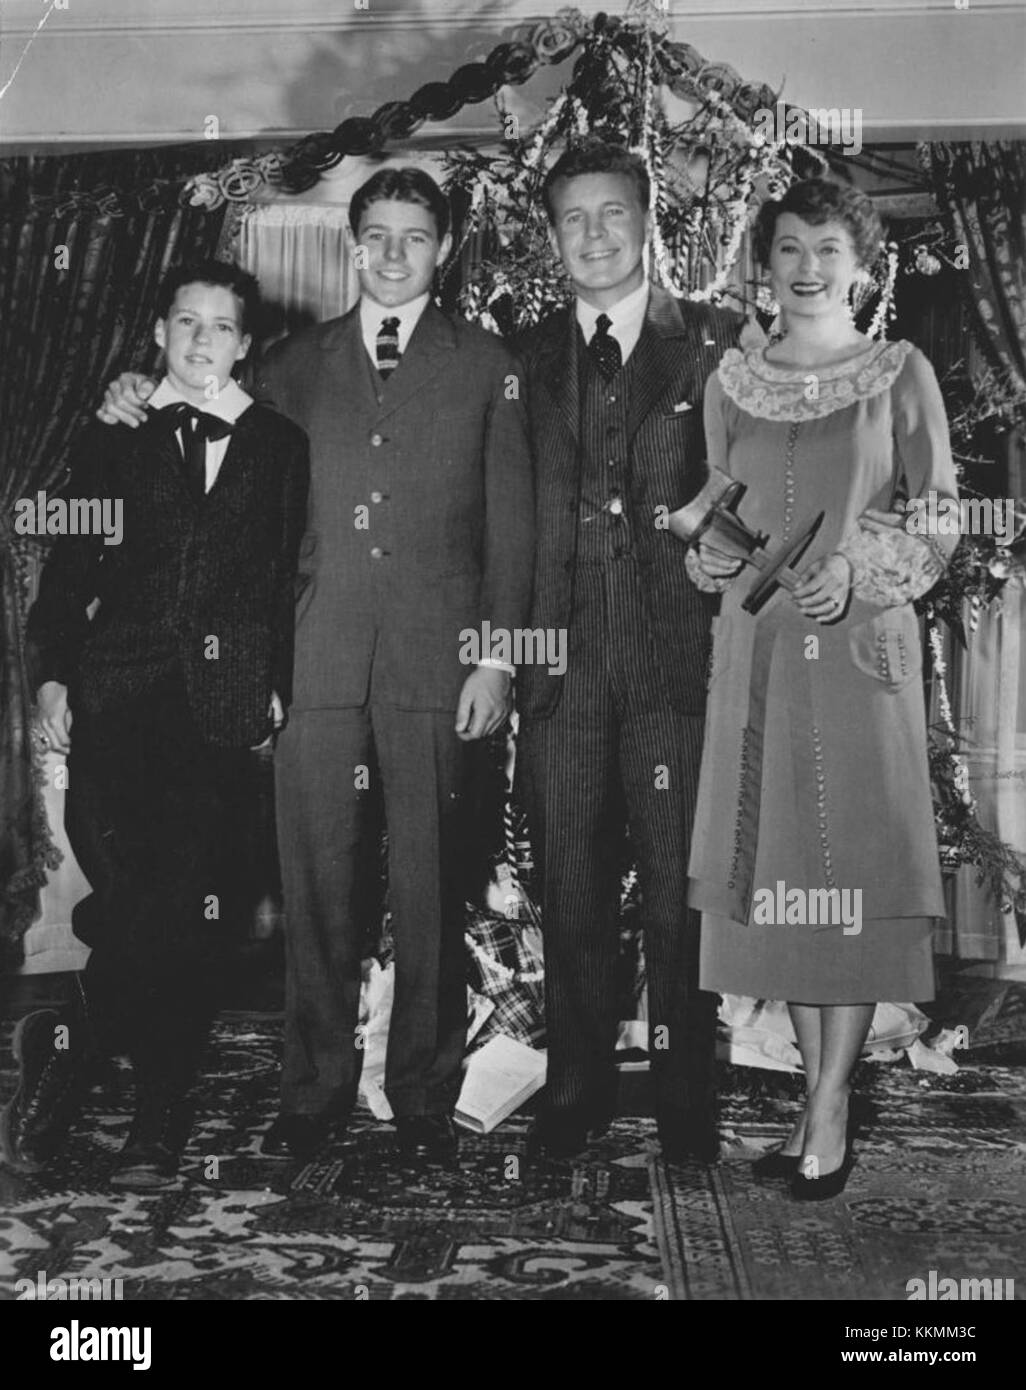 Repeat Yule Show: The Nelson family - Ozzie, Harriet and their sons, Rick, left, and David - are pictured in a scene from The Miracle,' a Christmas episode, first presented in 1953, scheduled for reshowing at 8:30 o'clock Wednesday night on Channel 4. The segment, filmed when the boys were 13 and 17, relates an incident in their father's boyhood. Rick is seen as the youthful Ozzie, David as his brother, Harriet as their mother and Ozzie as their late father. Adv of Ozzie and Harriet Nelson Family 1953 Stock Photo